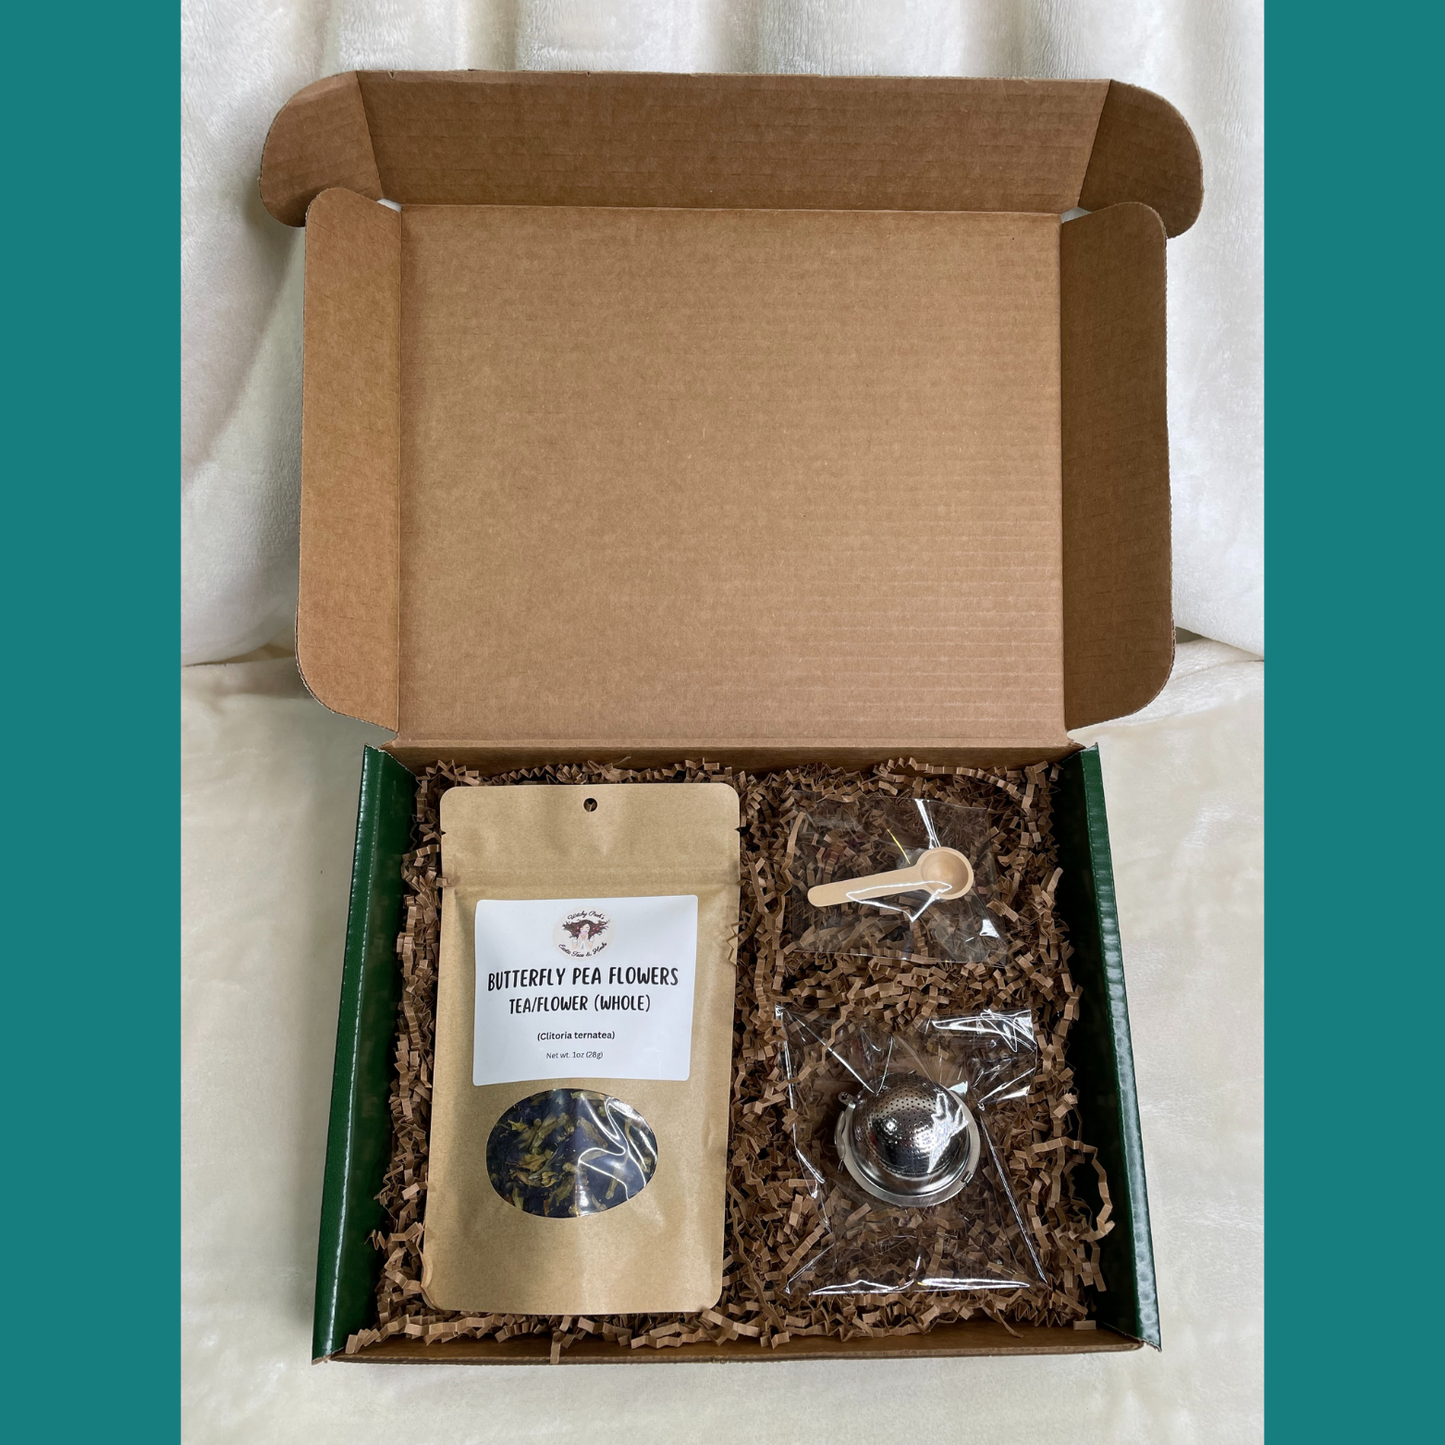 Witchy Pooh's Gift Box Set Green with a 1oz Pouch of Loose Leaf Tea, Stainless Steel Tea Ball and Wooden Spoon